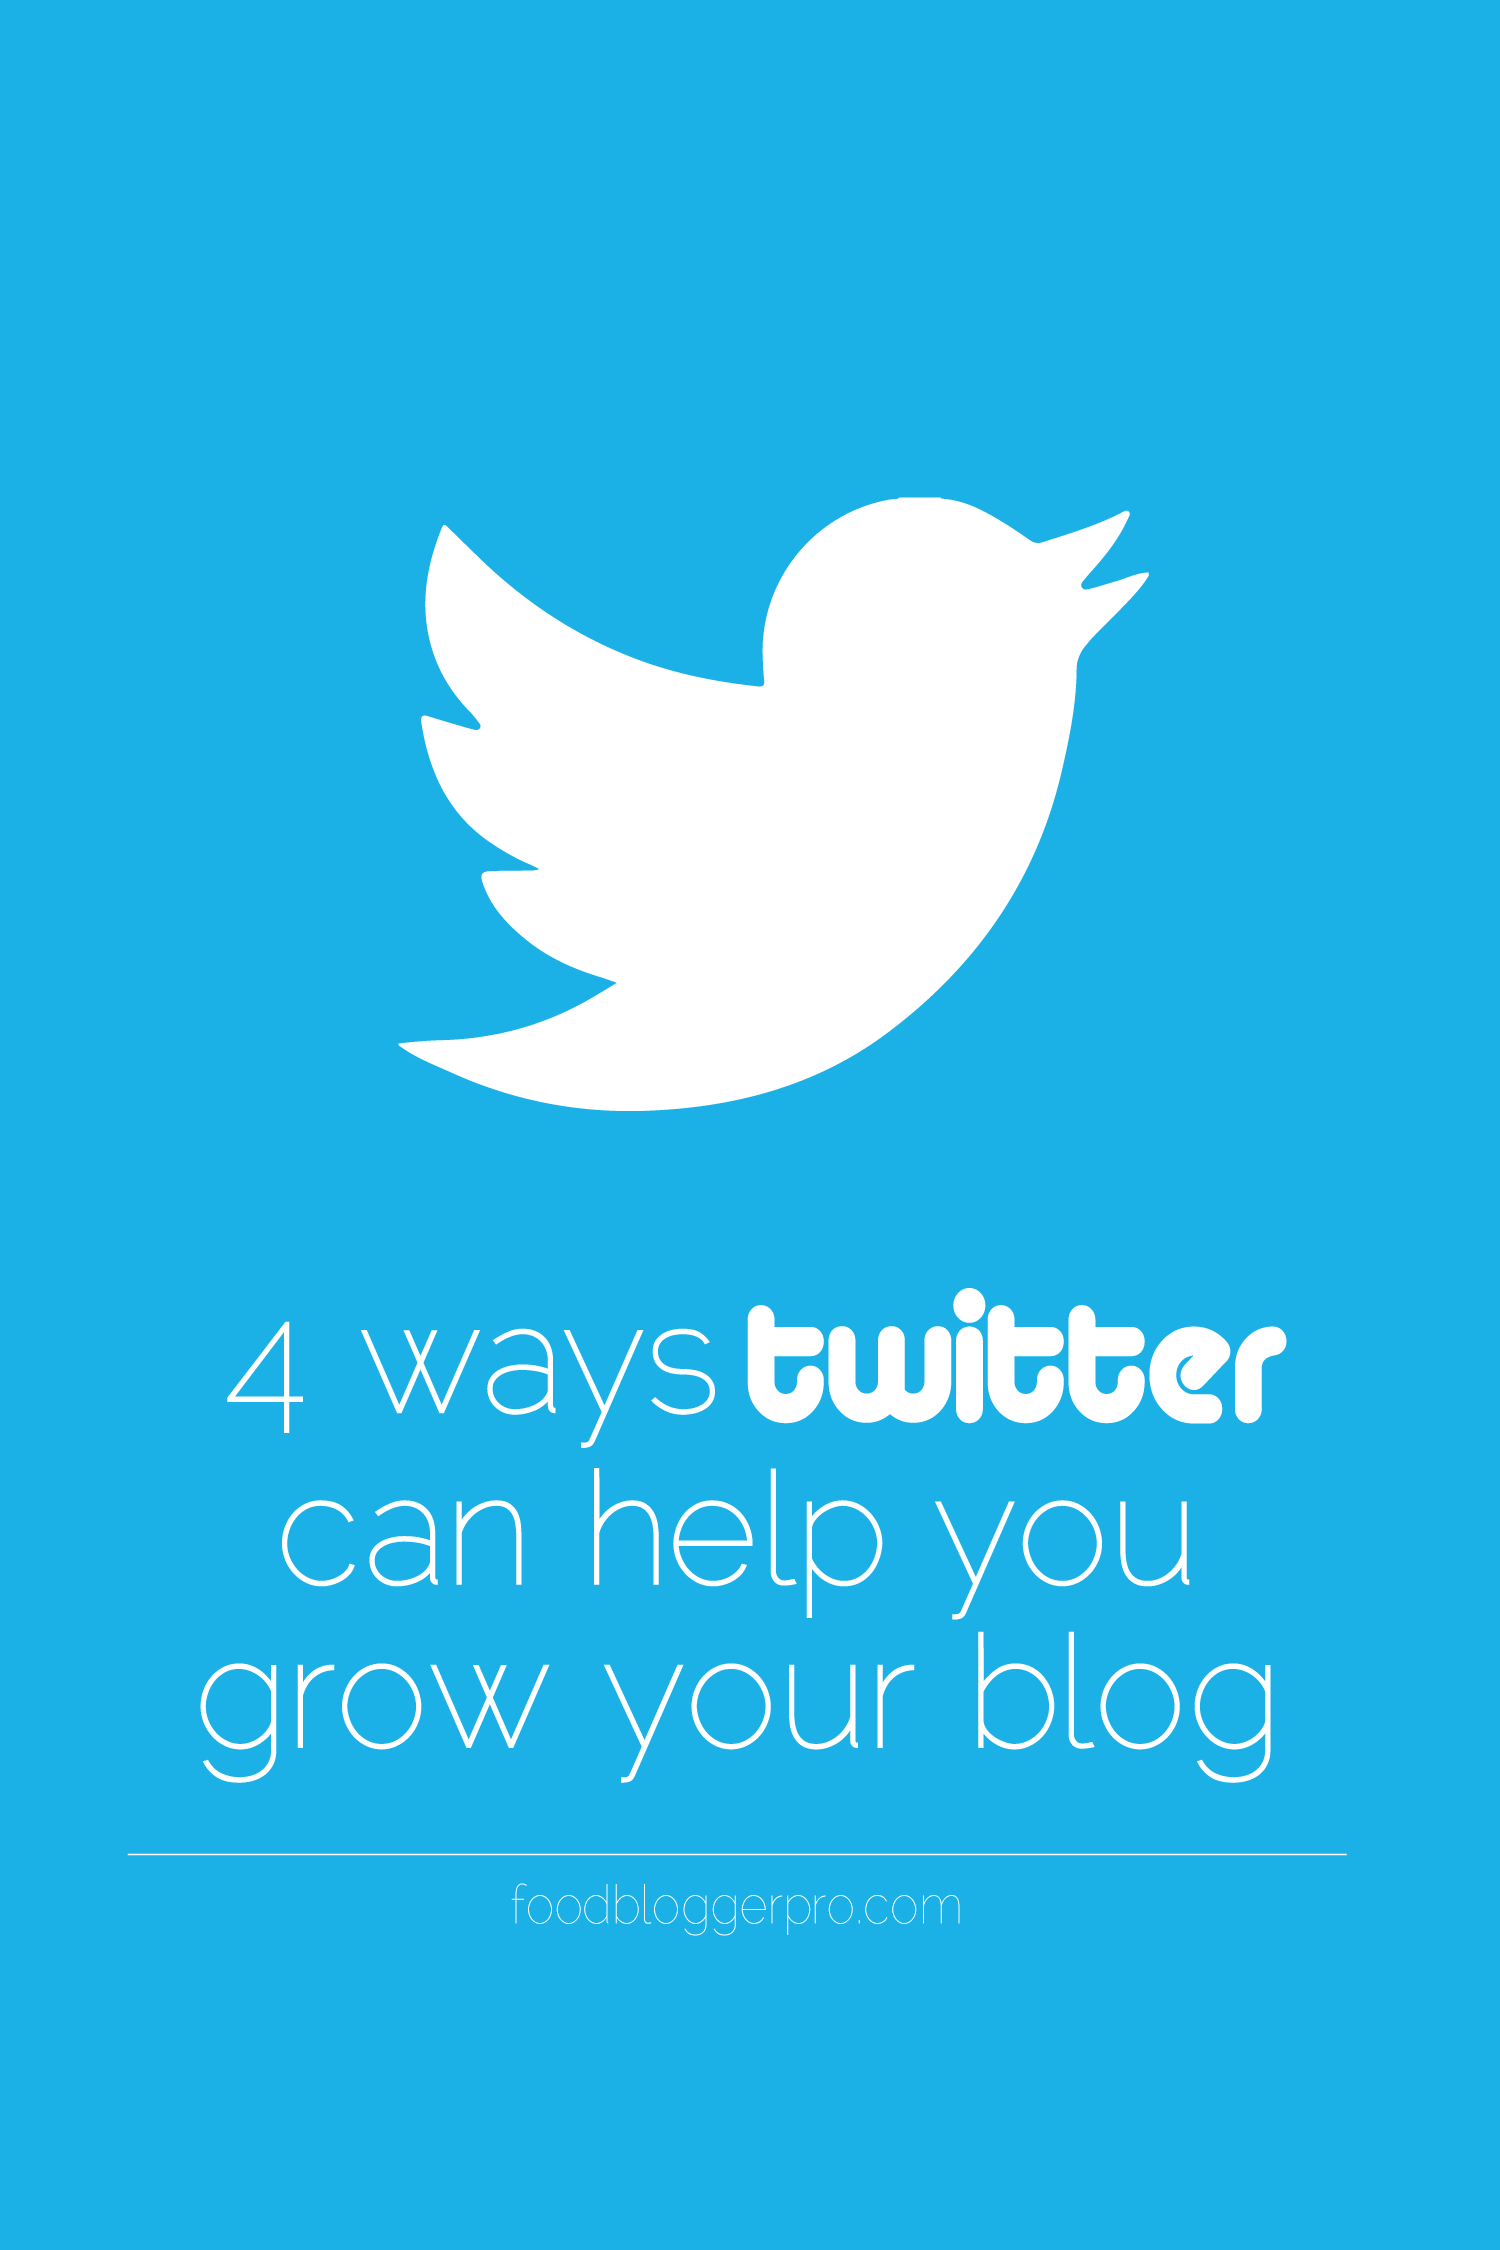 Graphic of Twitter logo that reads '4 ways Twitter can help grow your blog'